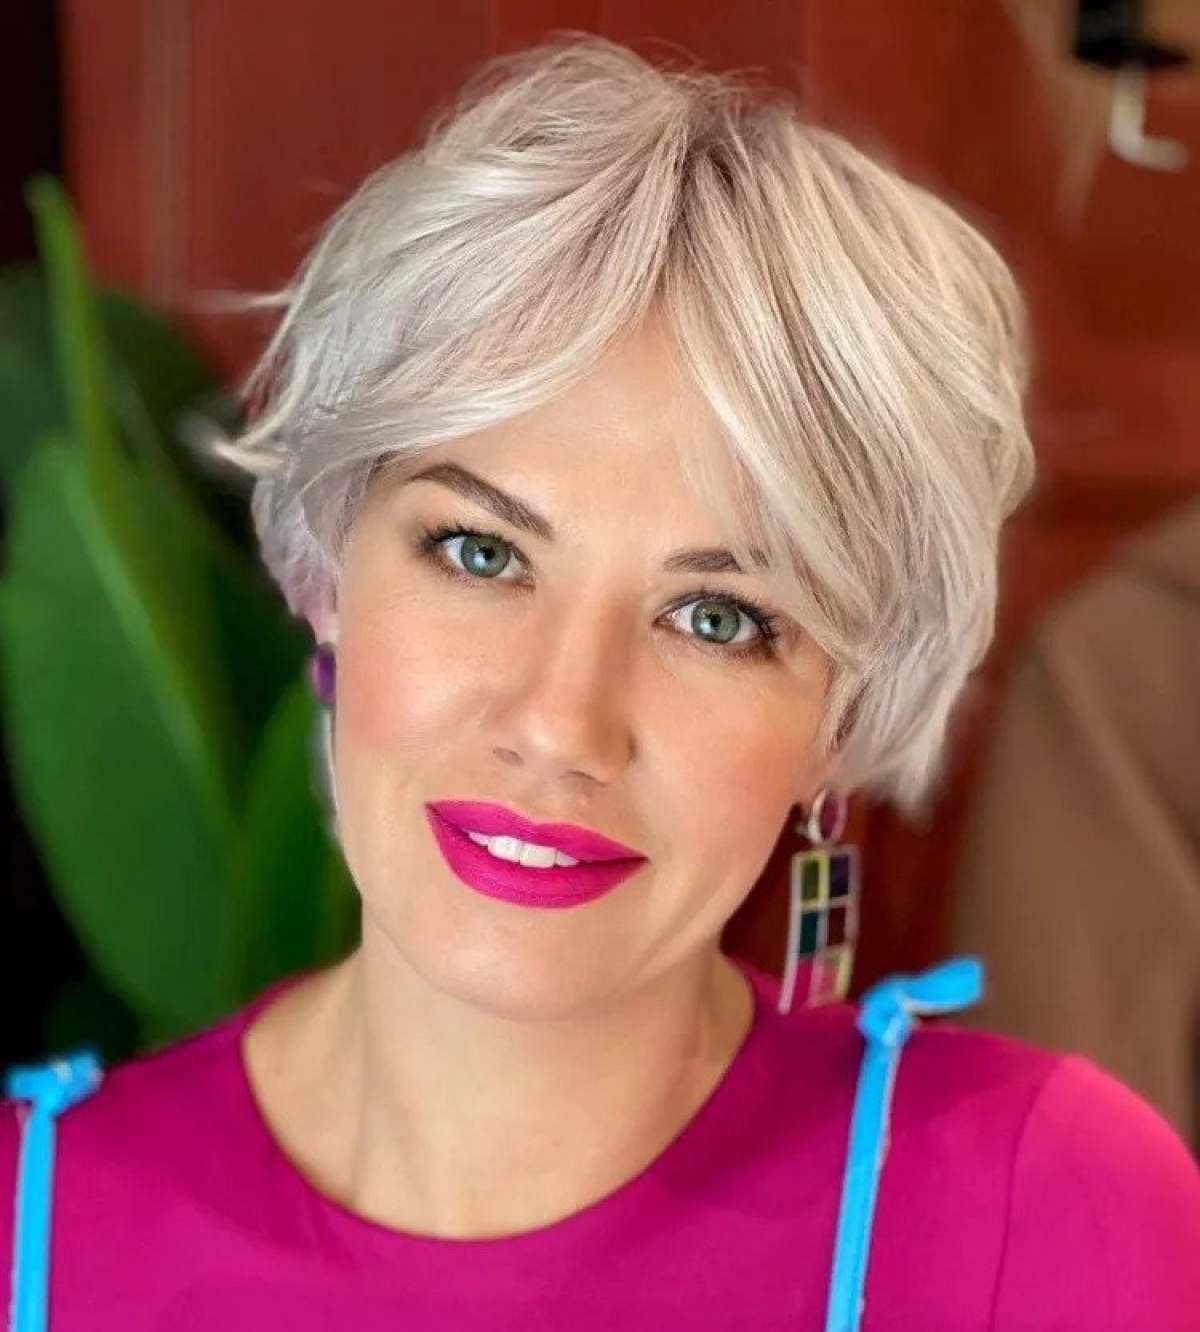 Bixie hairstyles for women over 50: The short hairstyle is trendy and makes  you look 10 years younger!